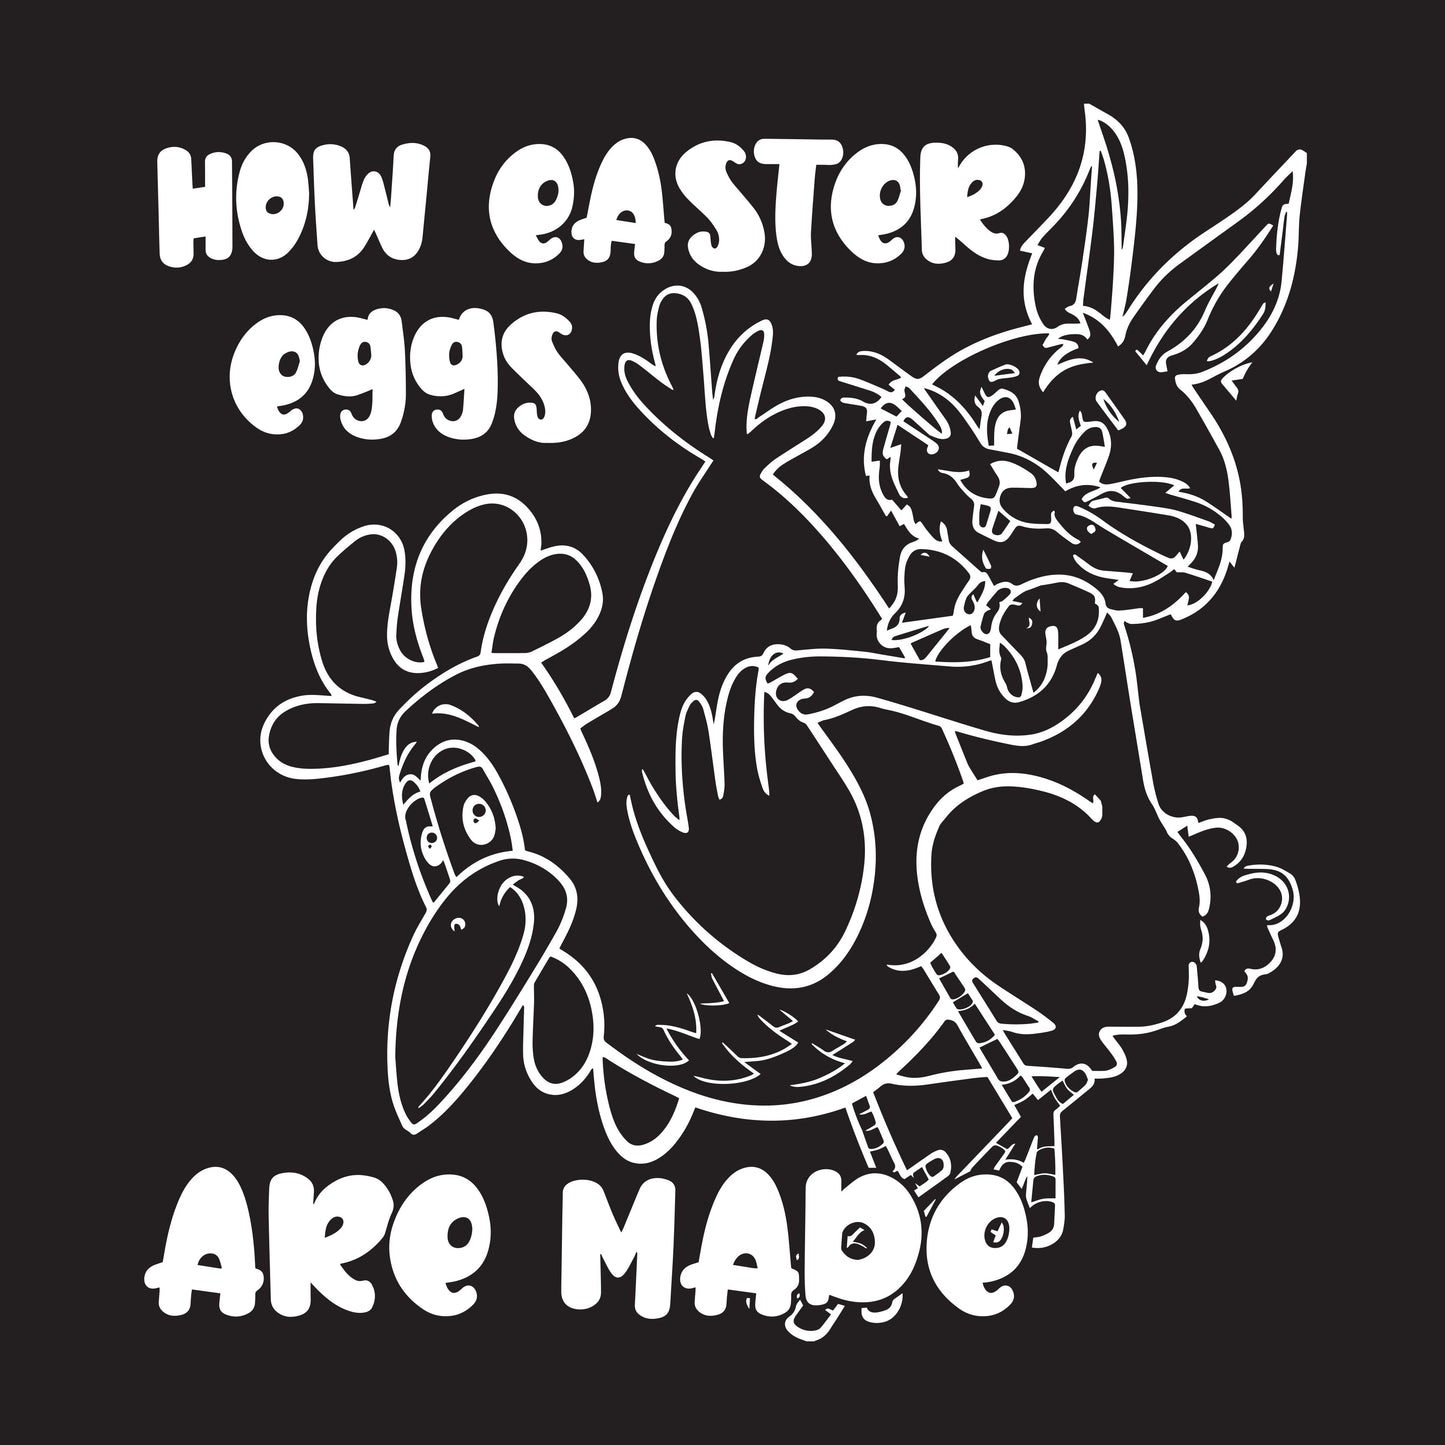 How Easter Eggs Are Made